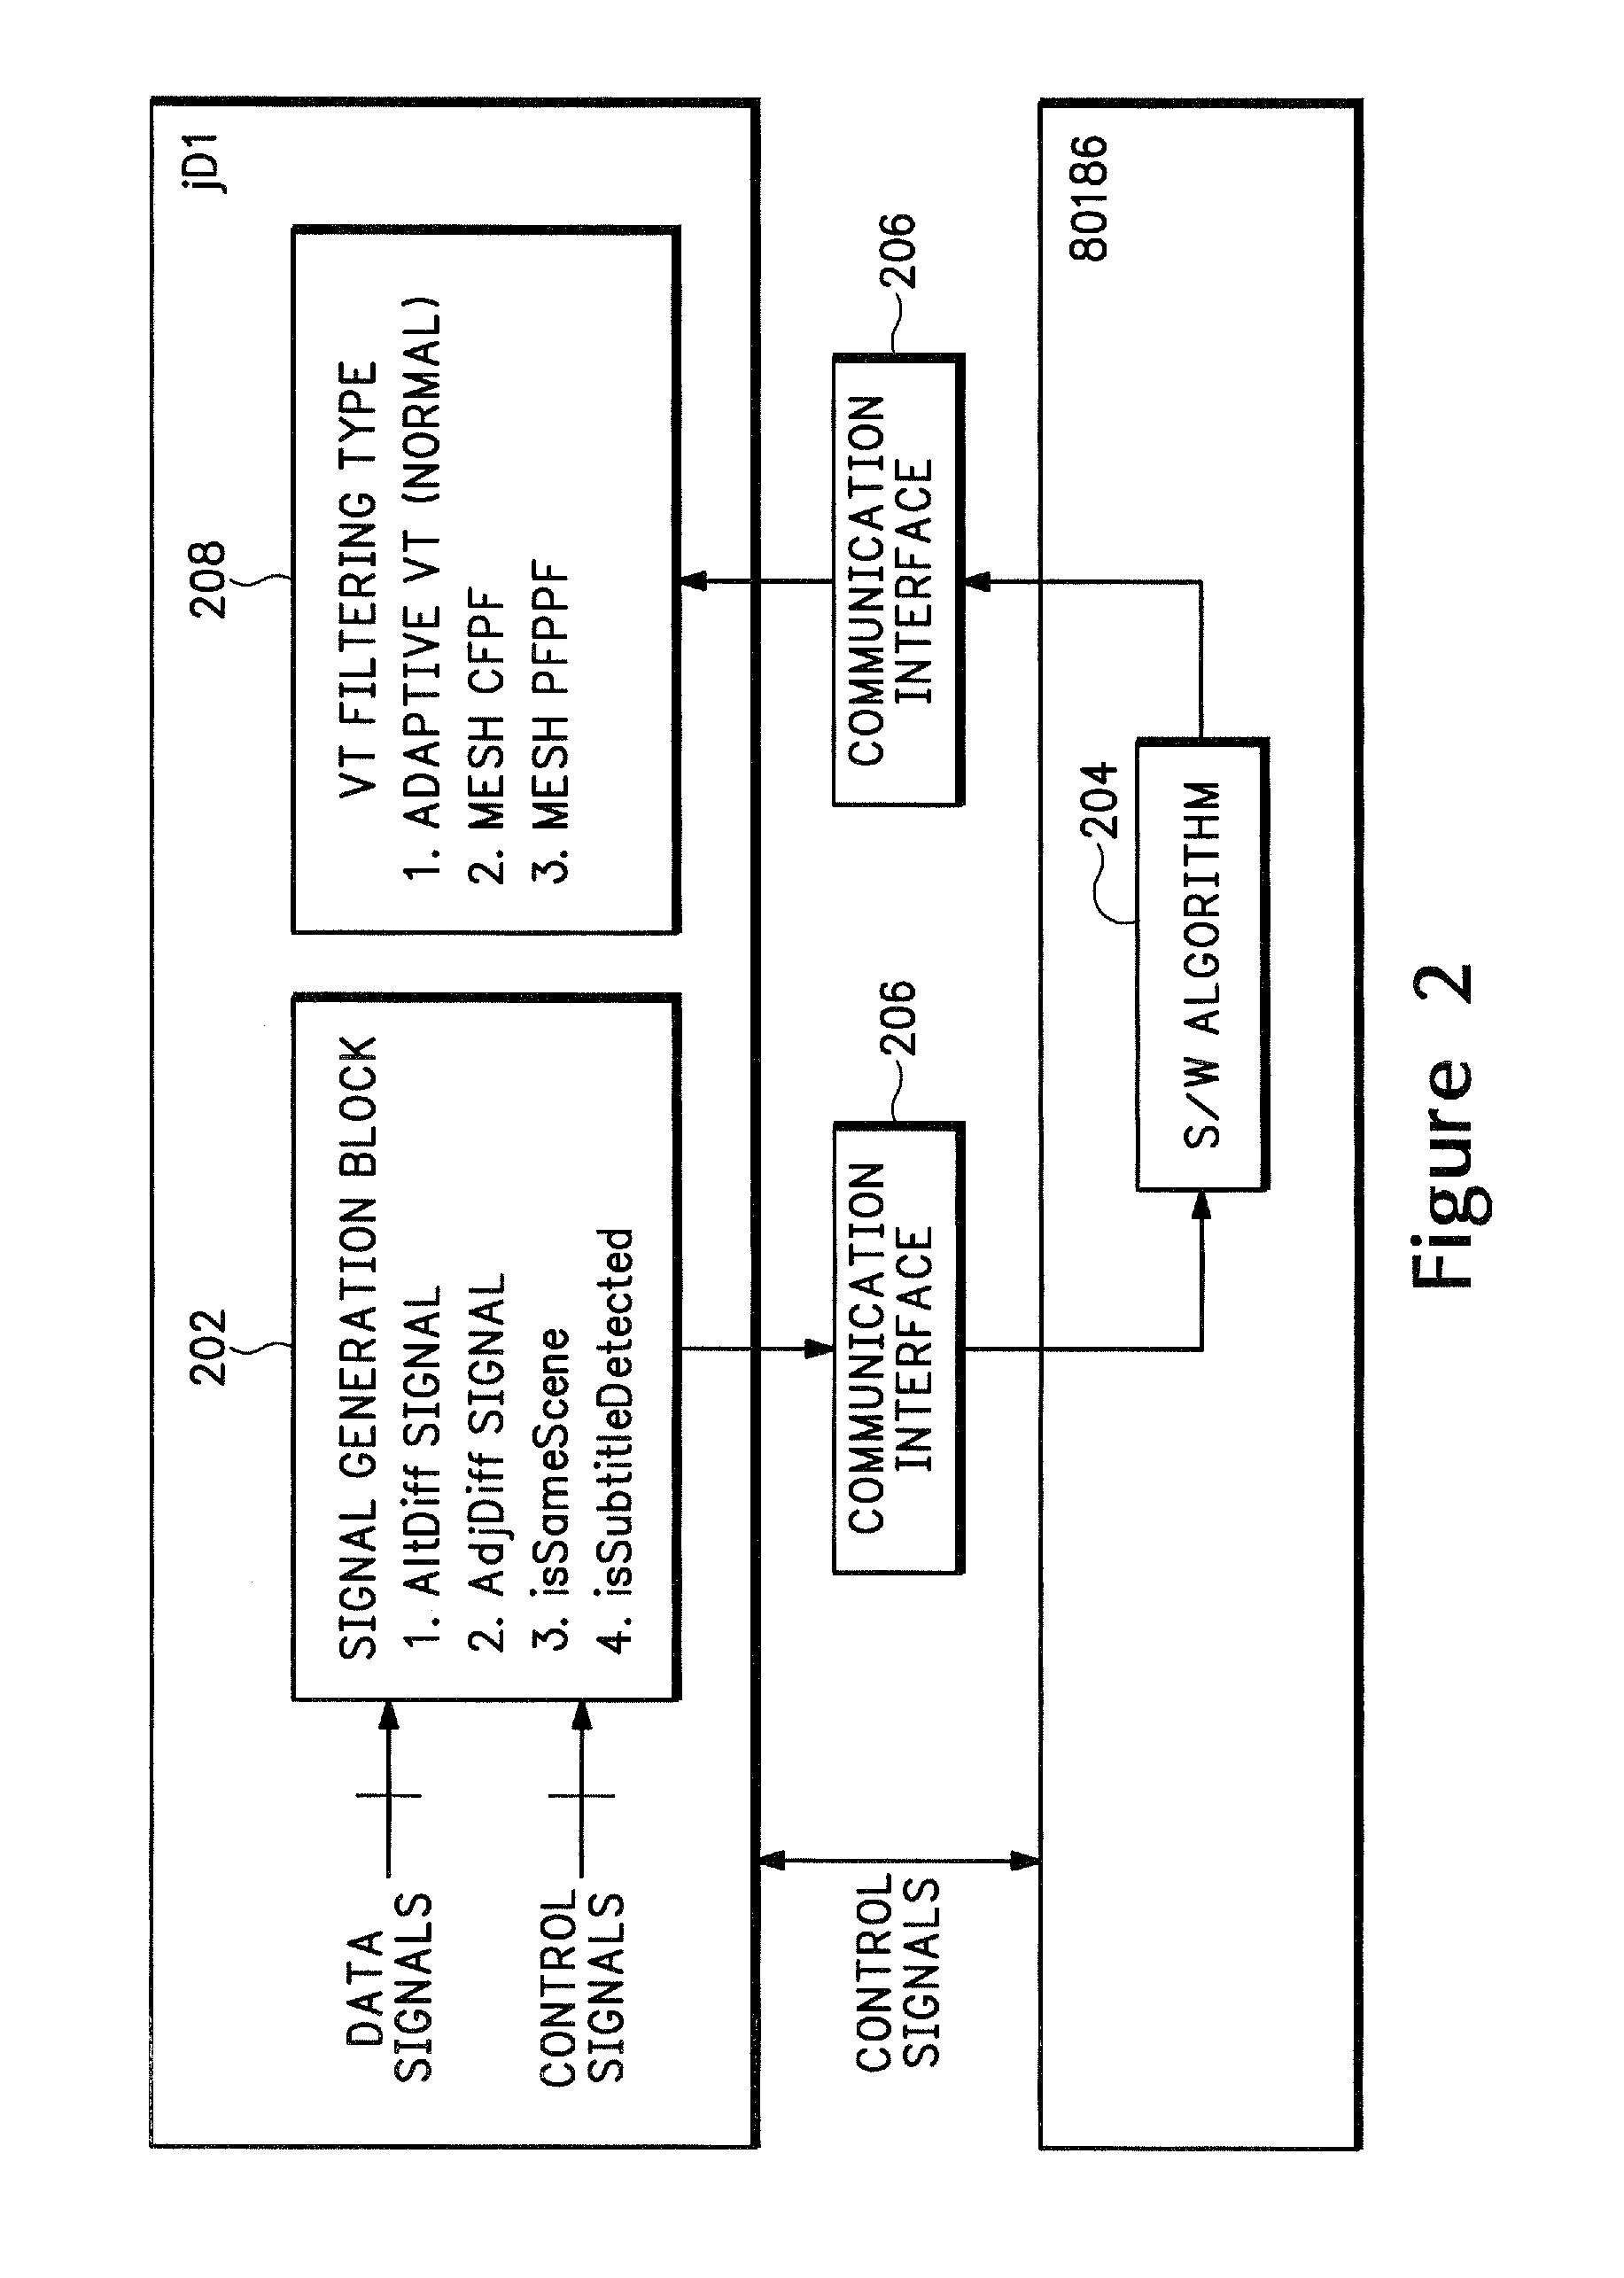 System and method for detecting a non-video source in video signals